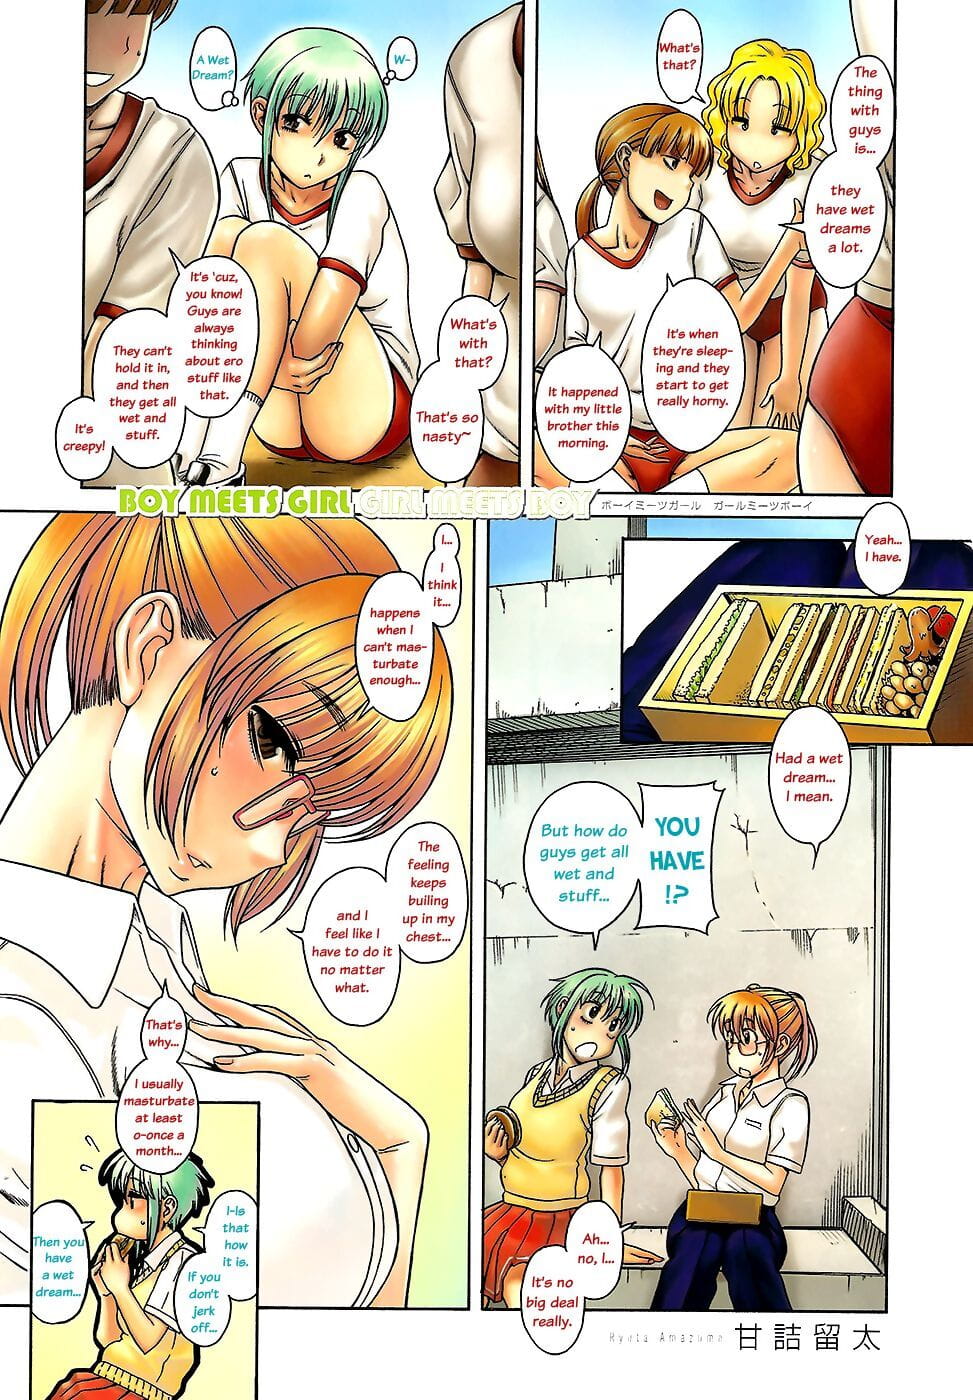 Boy Meets Girl- Girl Meets Boy Chapter 3 page 1